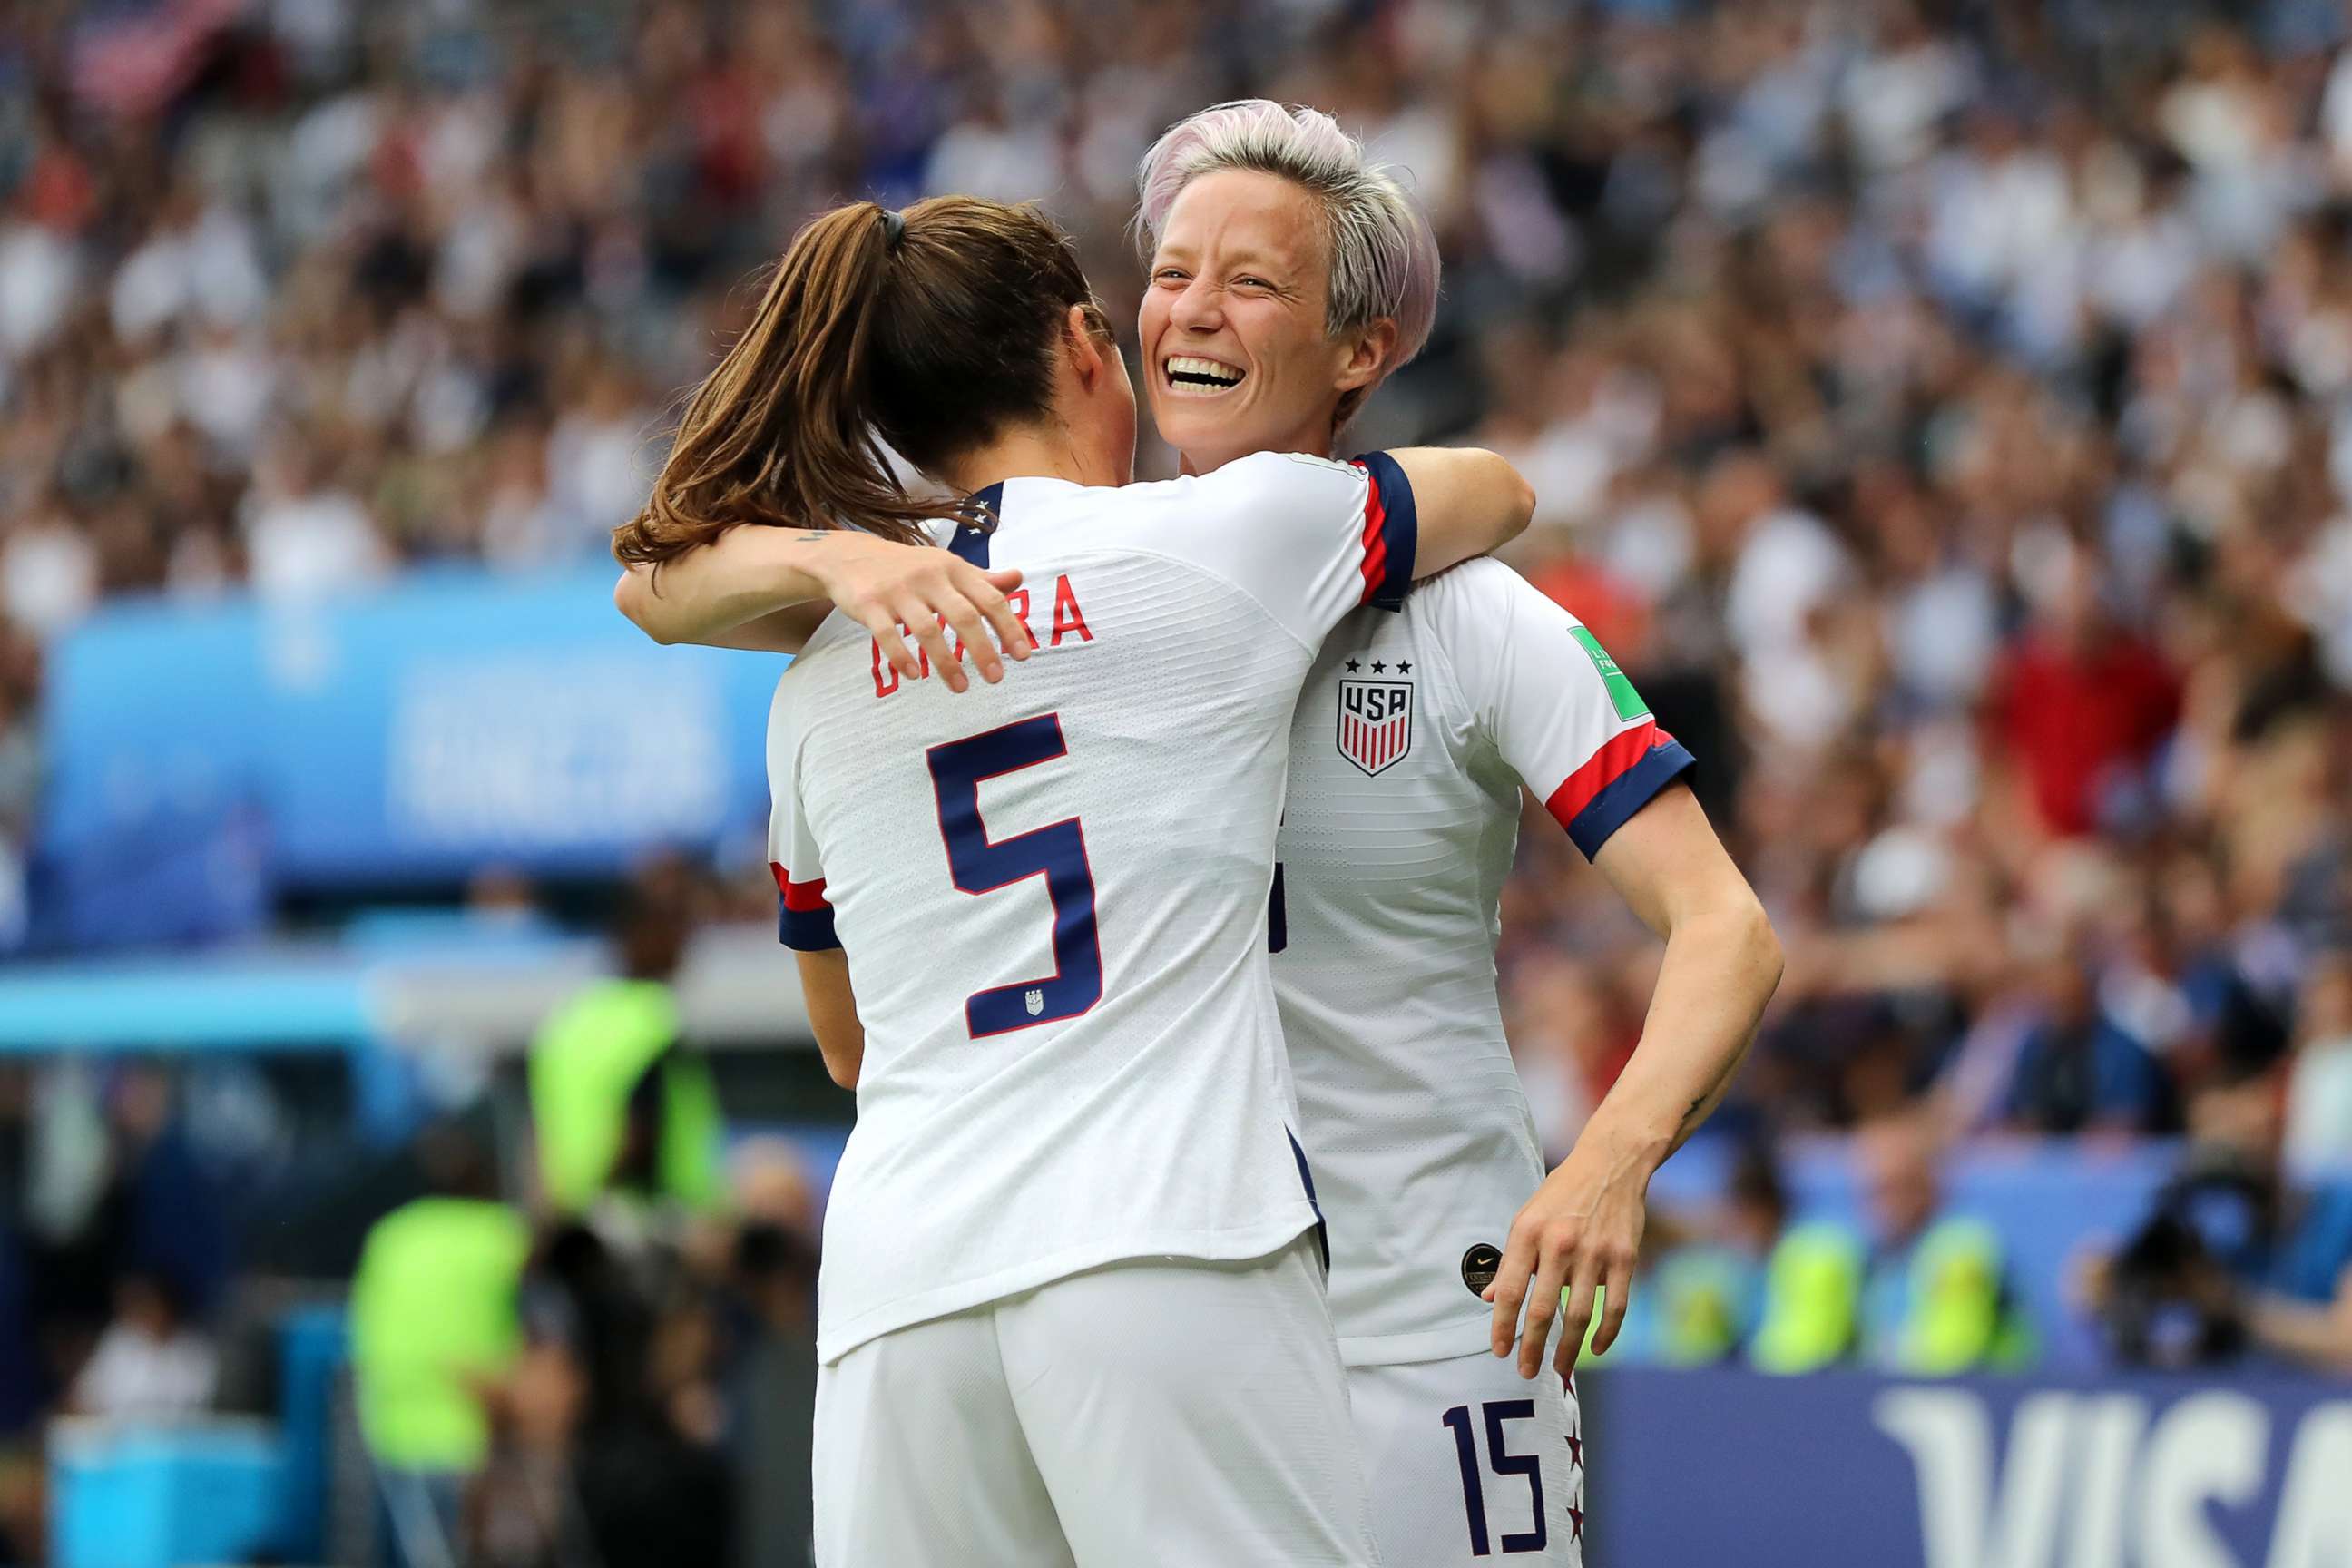 PHOTO: Megan Rapinoe of the USA celebrates with teammate Kelley O'hara after scoring her team's first goal during the 2019 FIFA Women's World Cup France Quarter Final match between France and USA at Parc des Princes, June 28, 2019 in Paris.